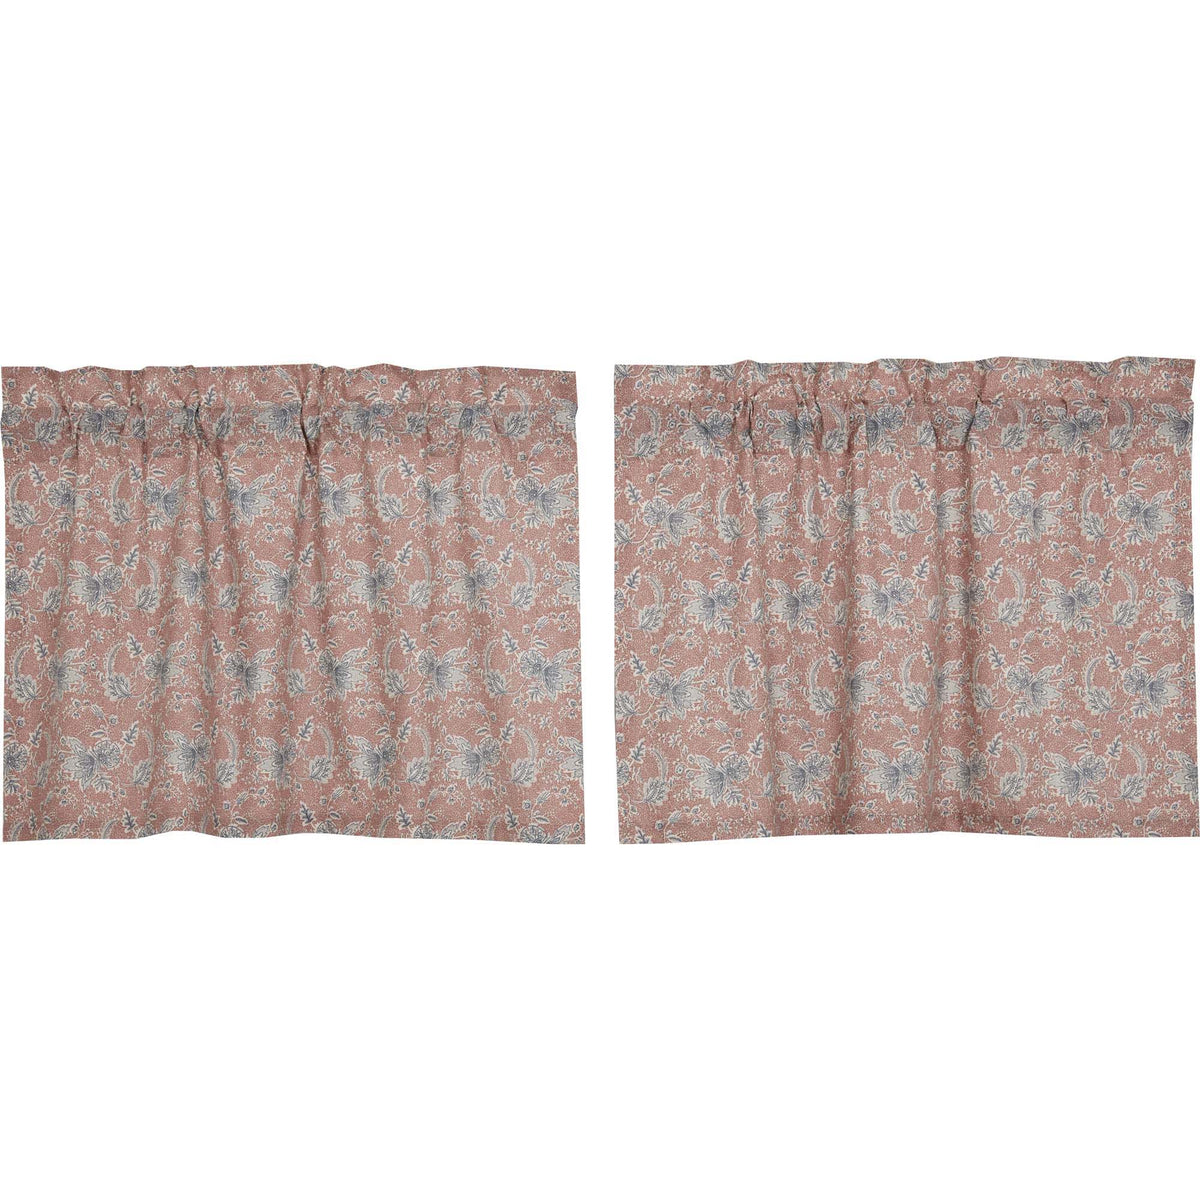 Kaila Floral Tier Set of 2 L24xW36